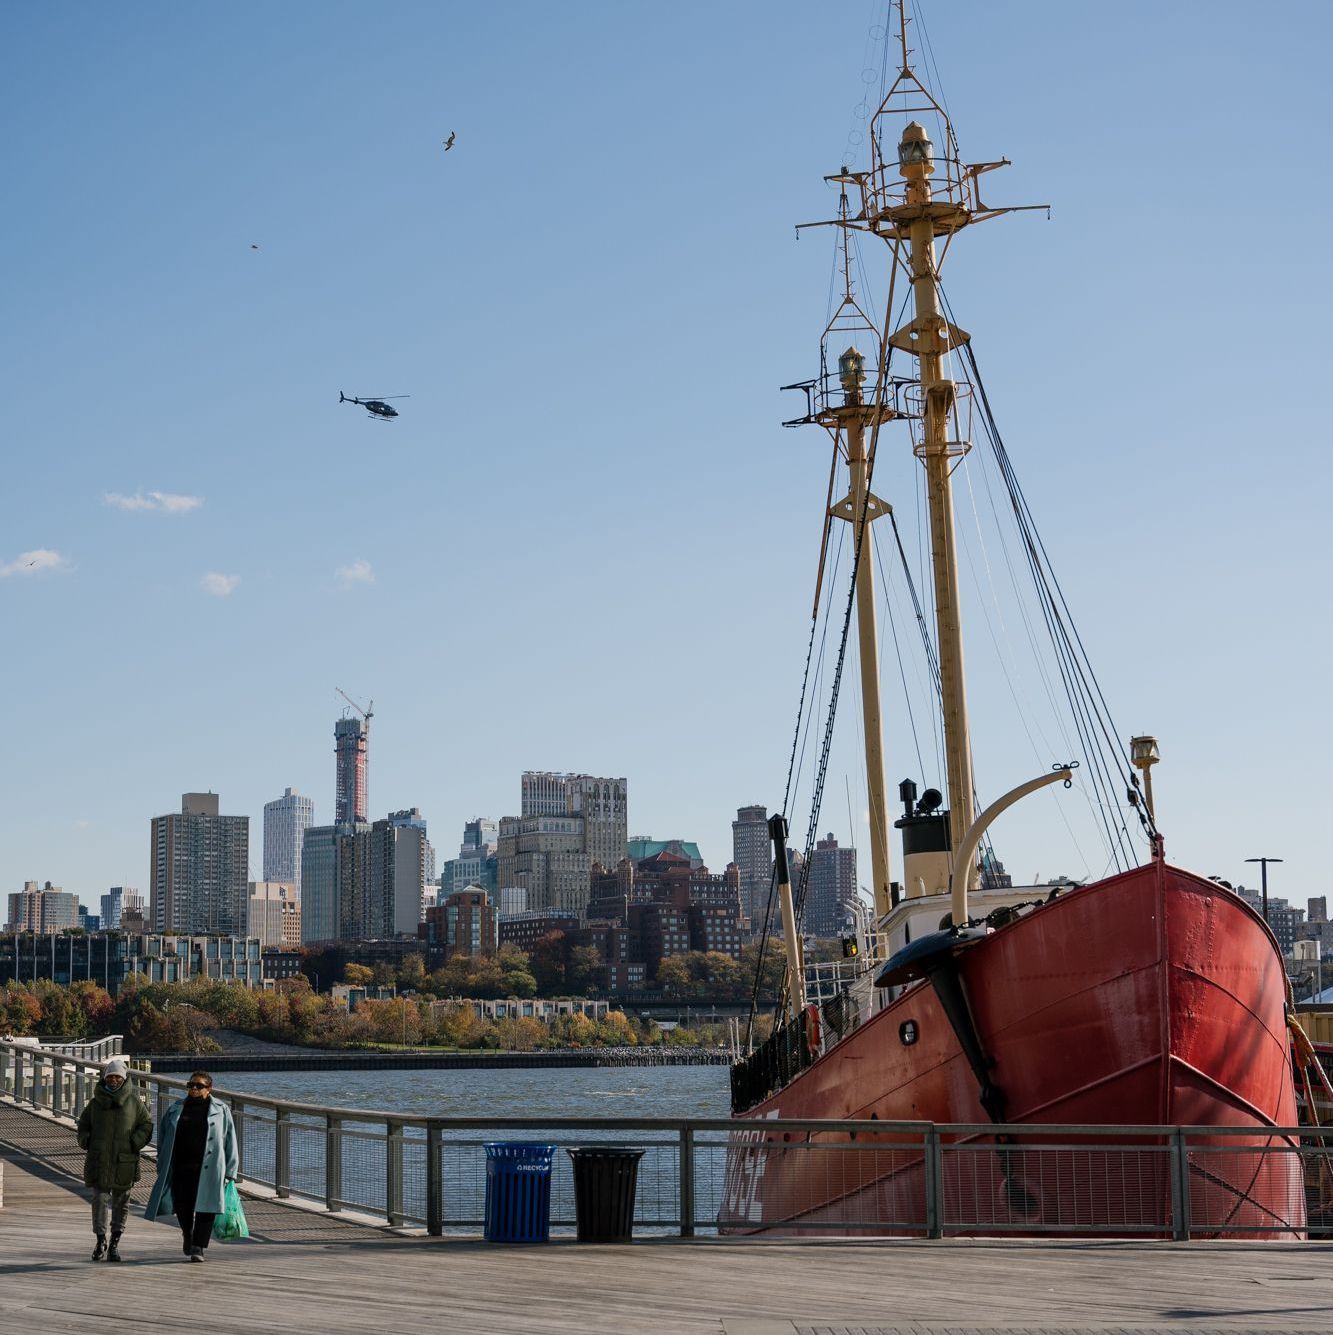 Lightship Ambrose 
The first vessel to join the @seaportmuseum fleet ⎈

Explore more info ➤ Link in bio.